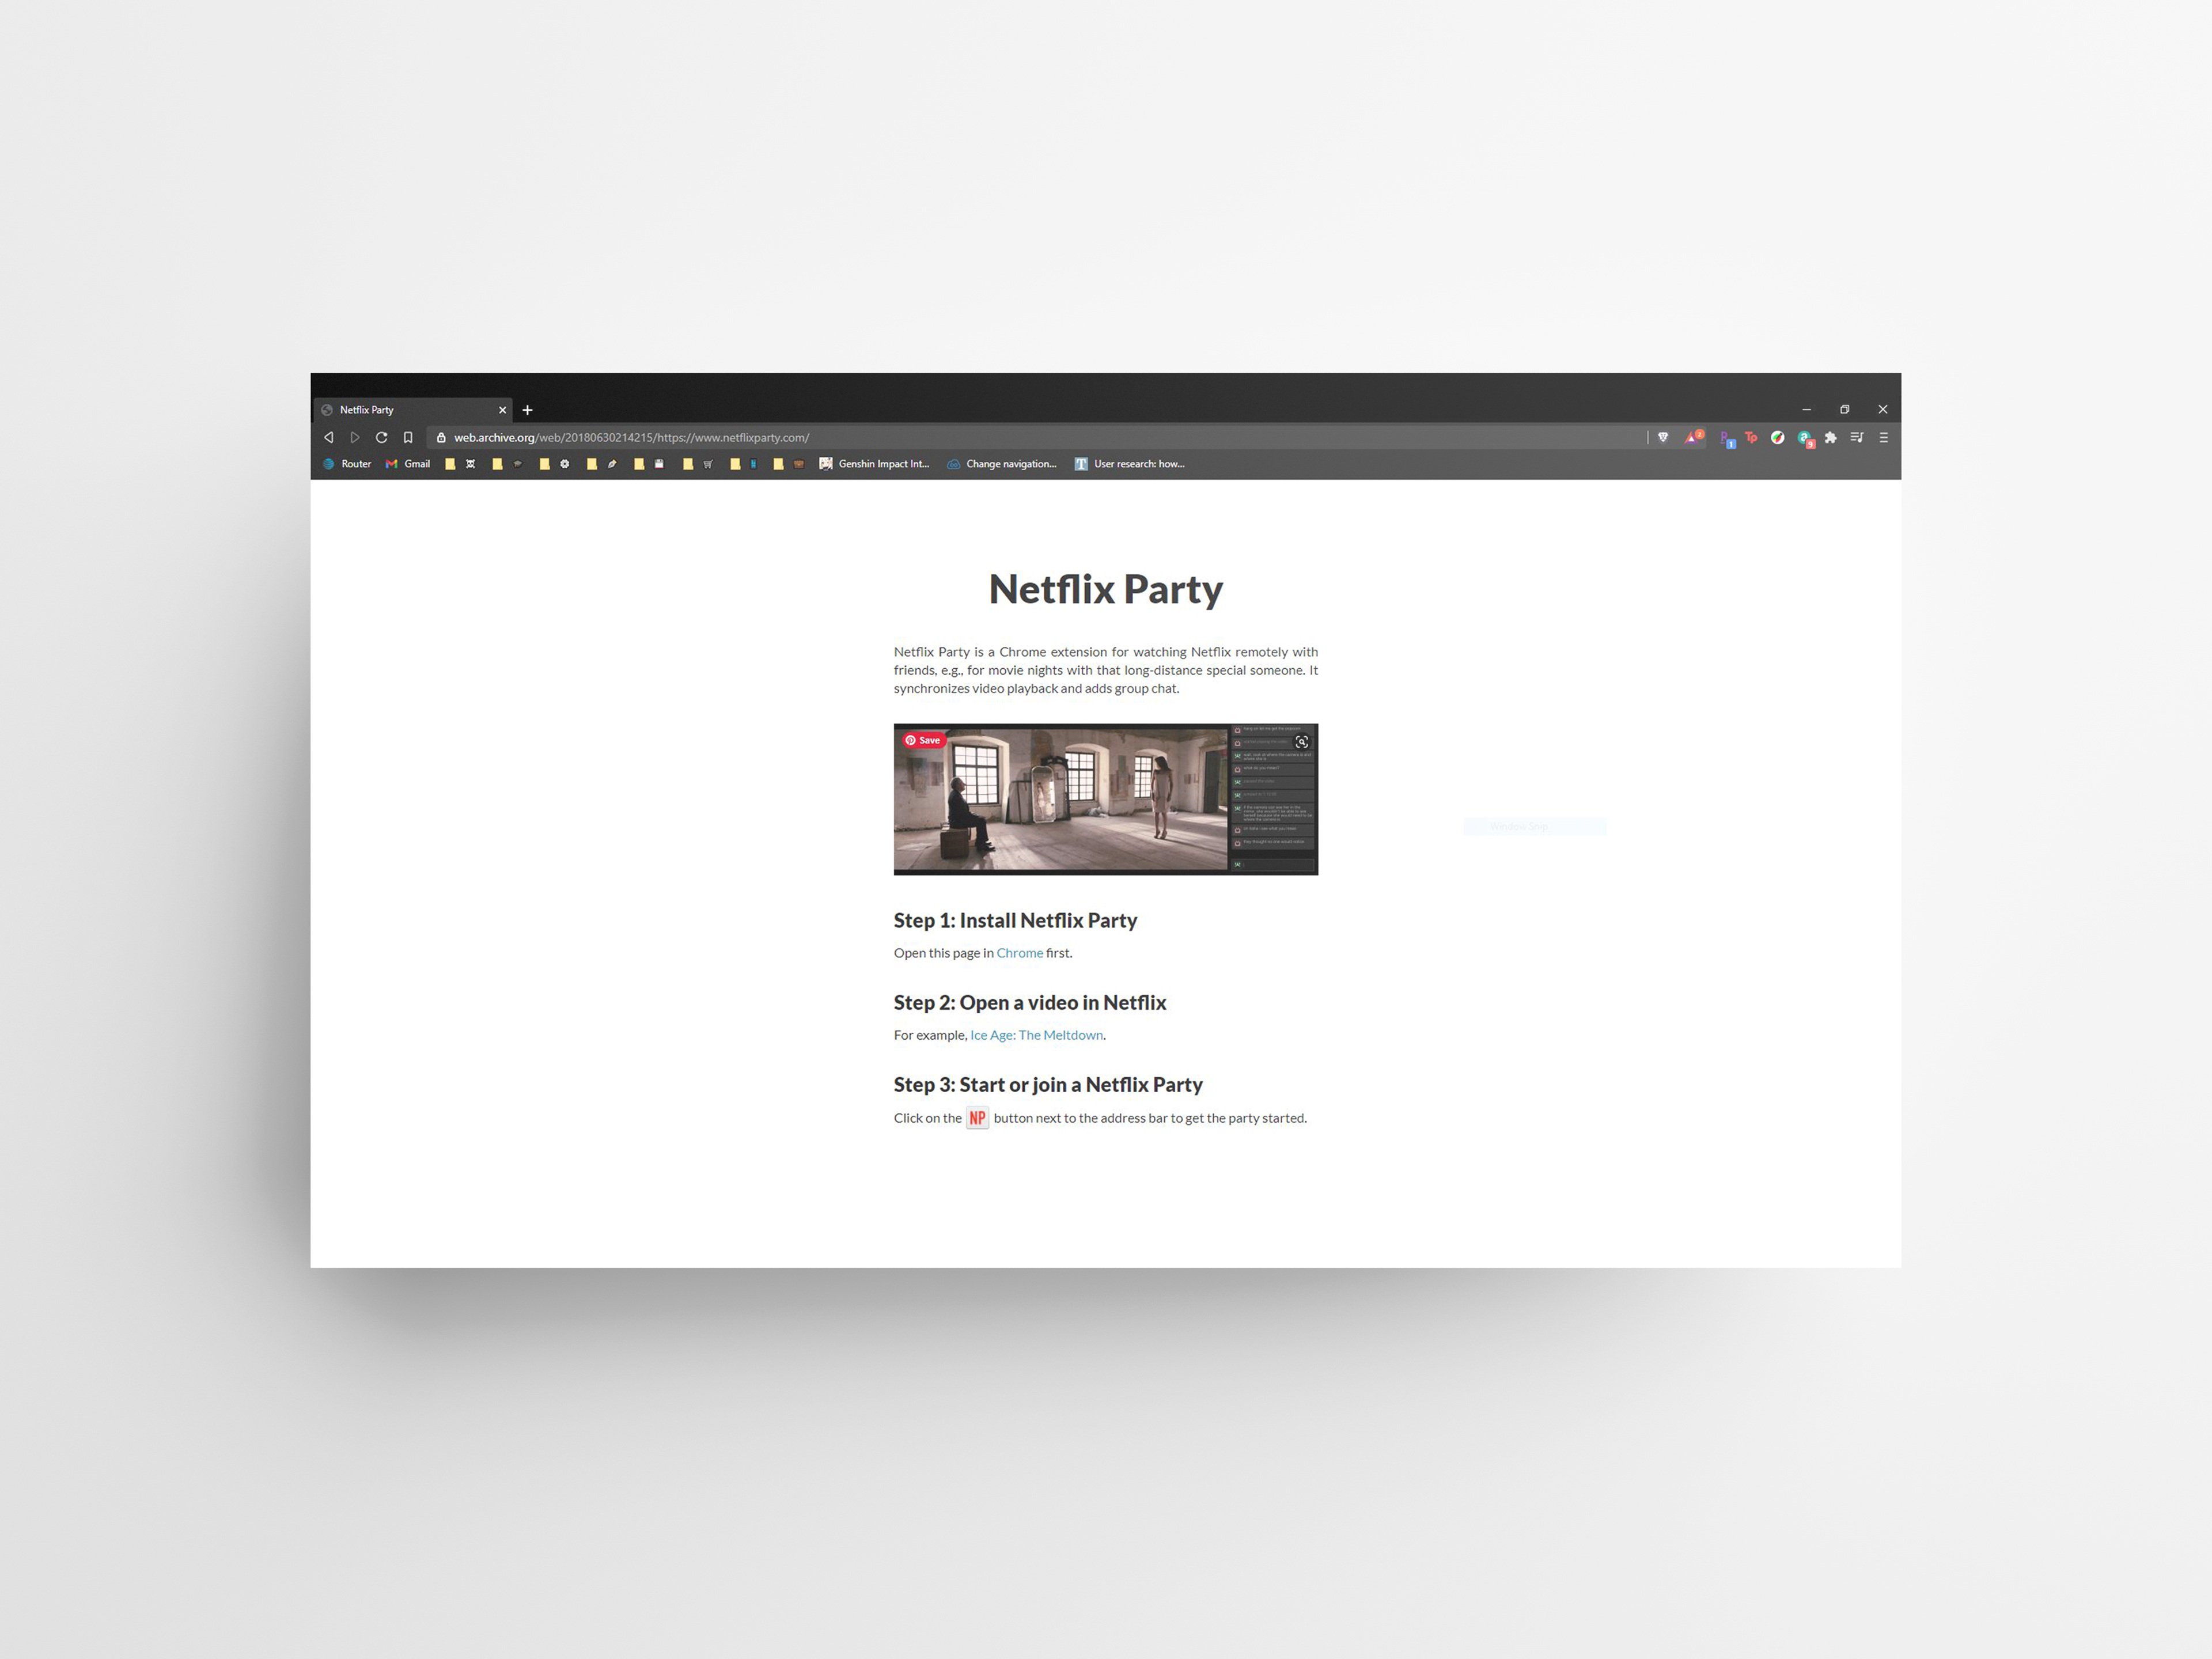 Here are some of the previous Google Chrome marketing materials created for Netflix Party.